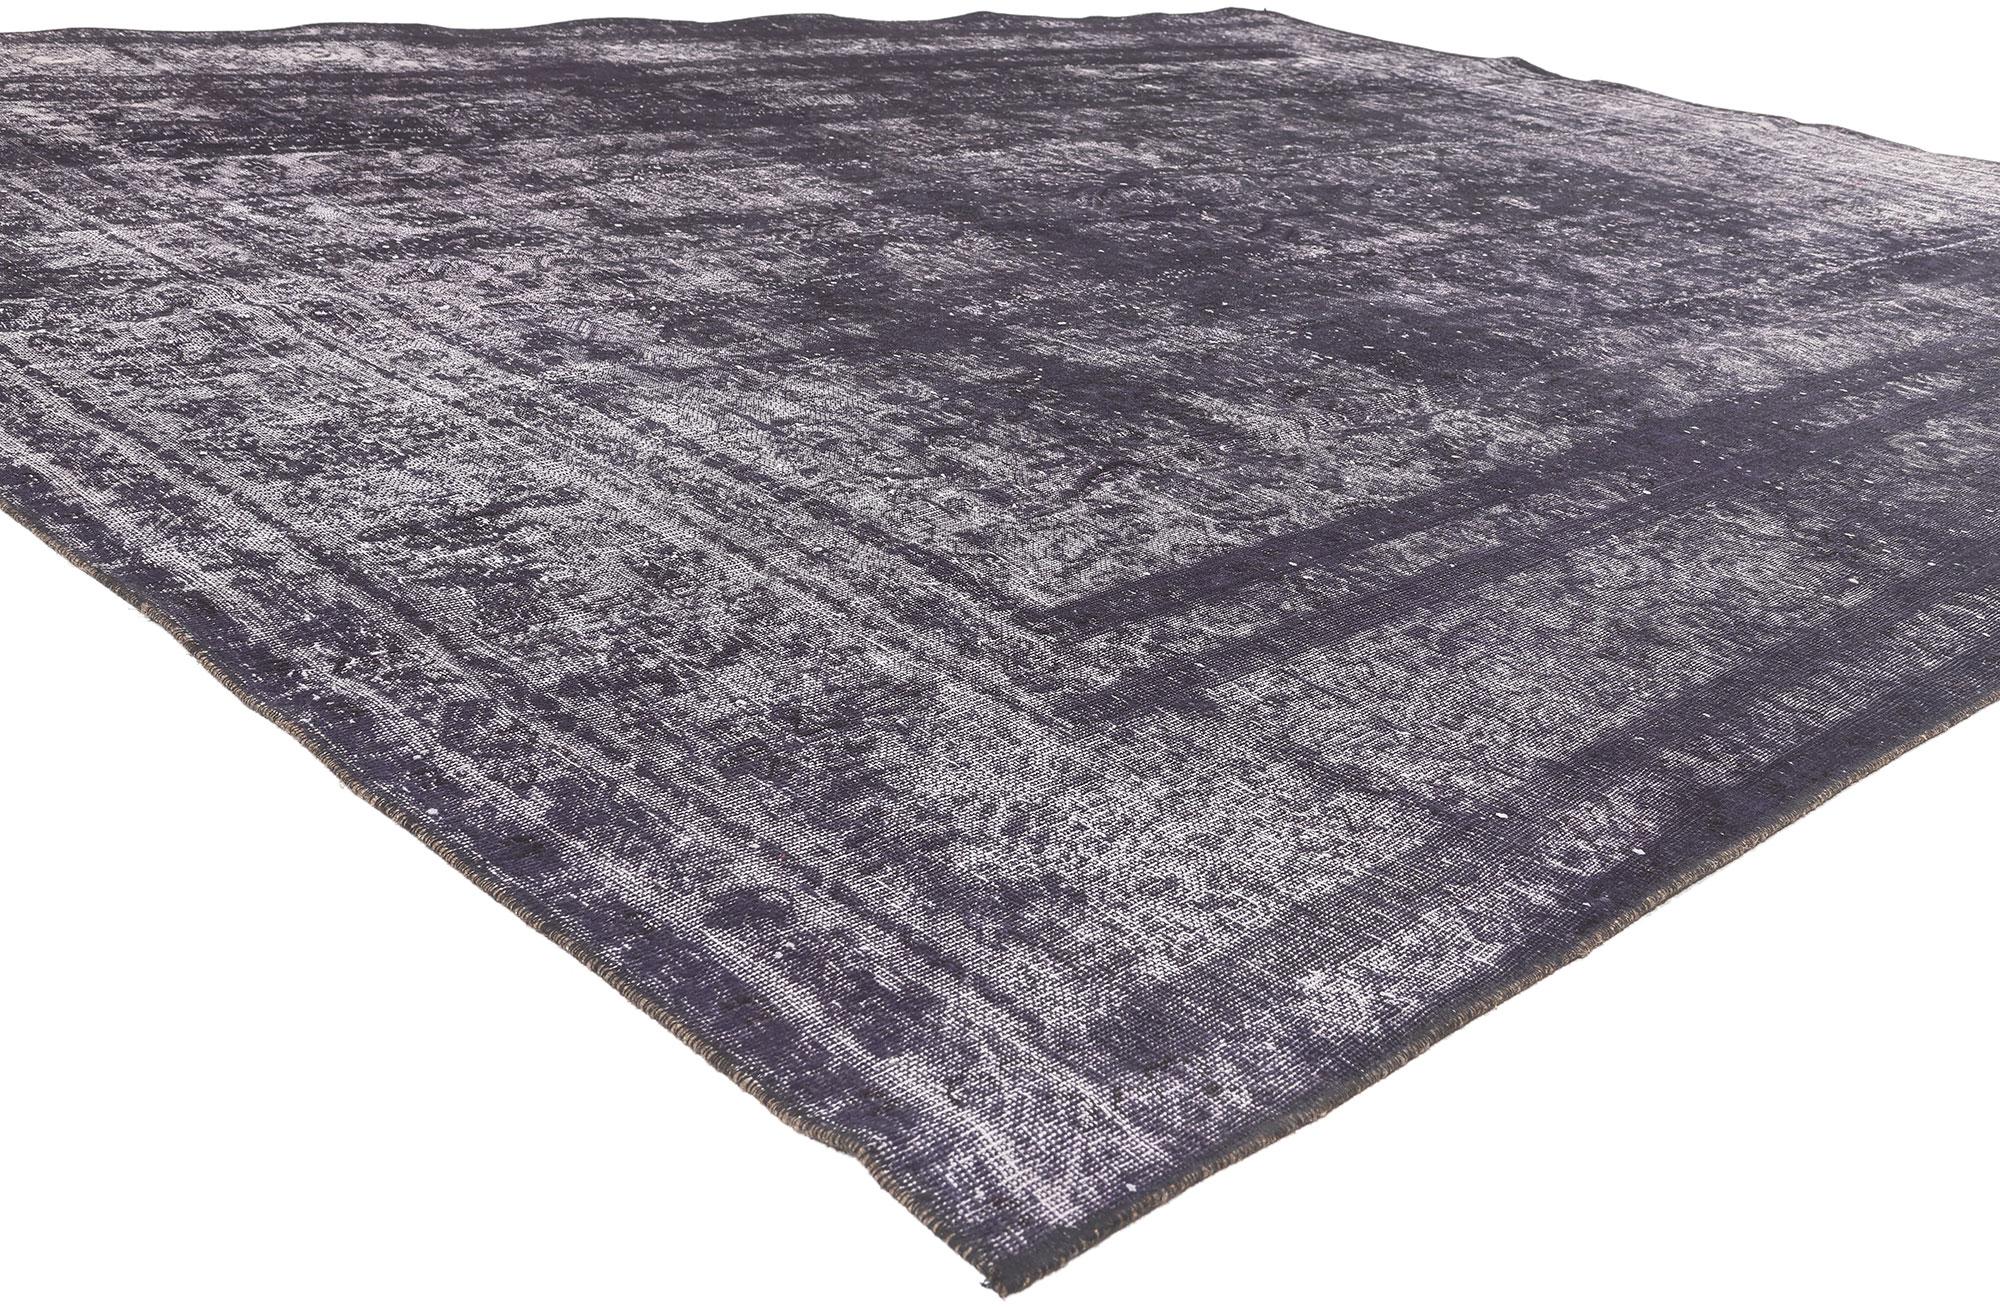 60692 Vintage Turkish Overdyed Rug, 09’05 x 12’04. 
Industrial Chic meets luxe utilitarian appeal in this hand knotted wool vintage Turkish overdyed rug. The erased botanical design and monochromatic color scheme in this piece work together